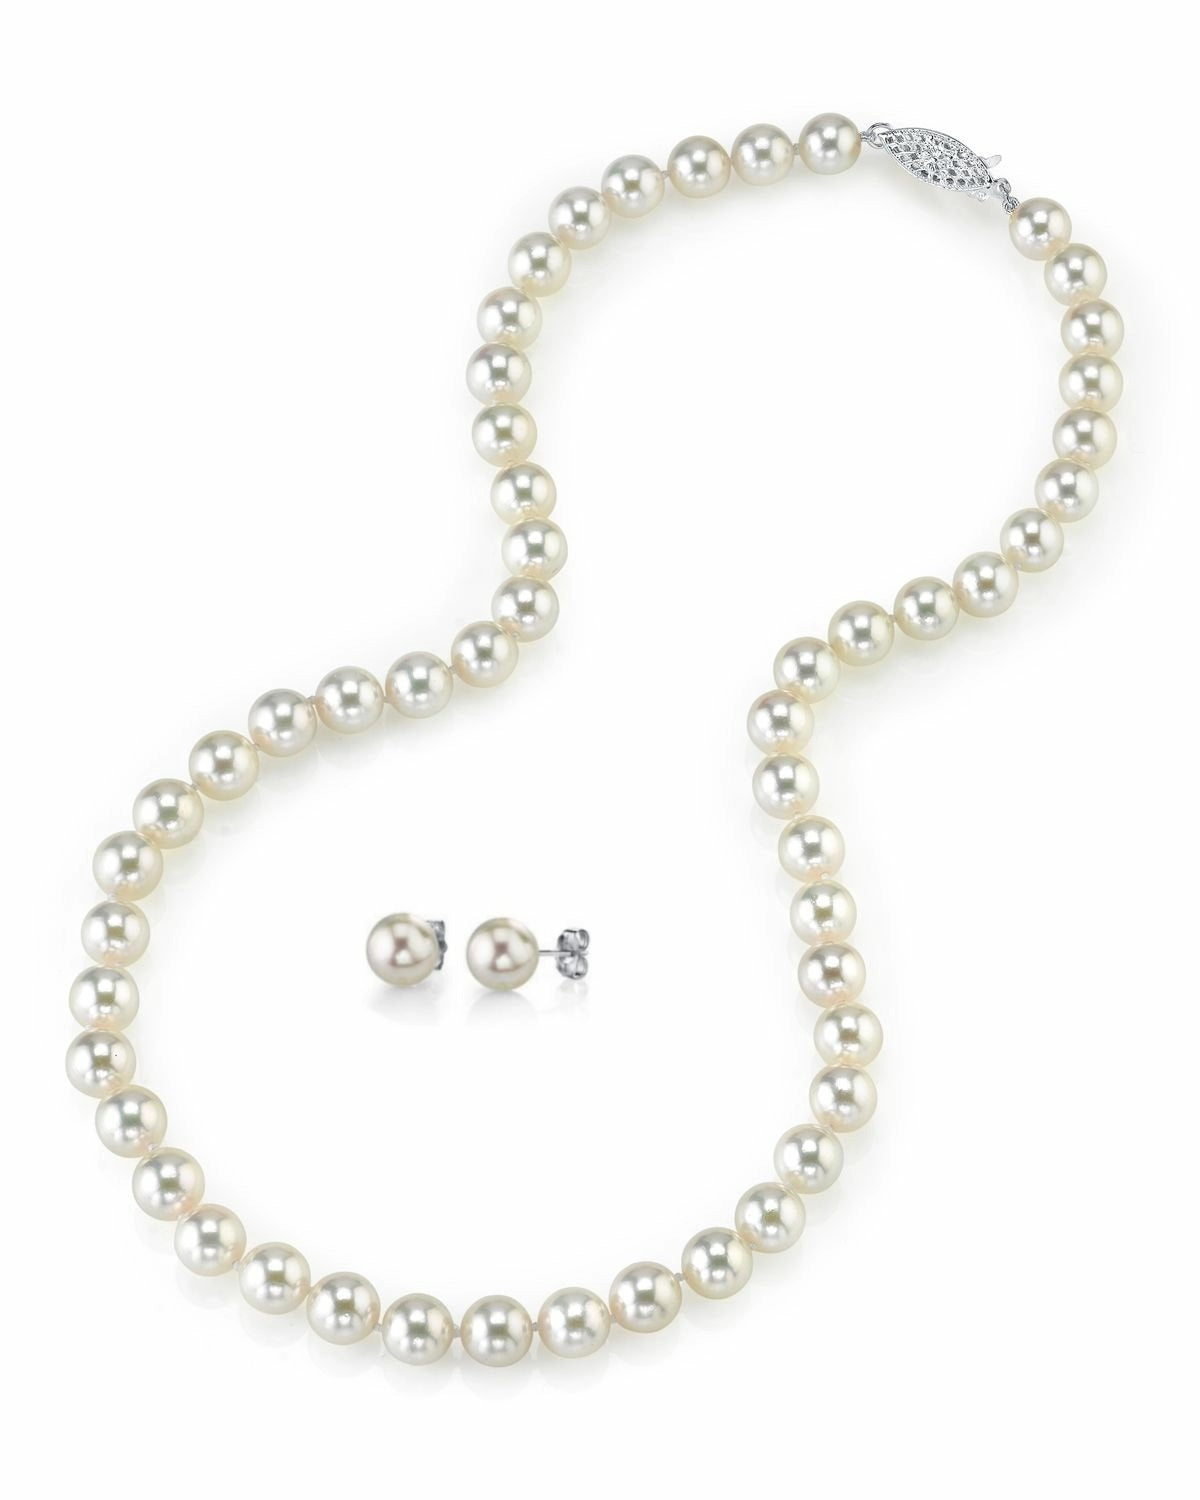 Delightful Lavender Semi-Round Pearl Necklace With Starry Rose Gold Pendant  - Pure Pearls